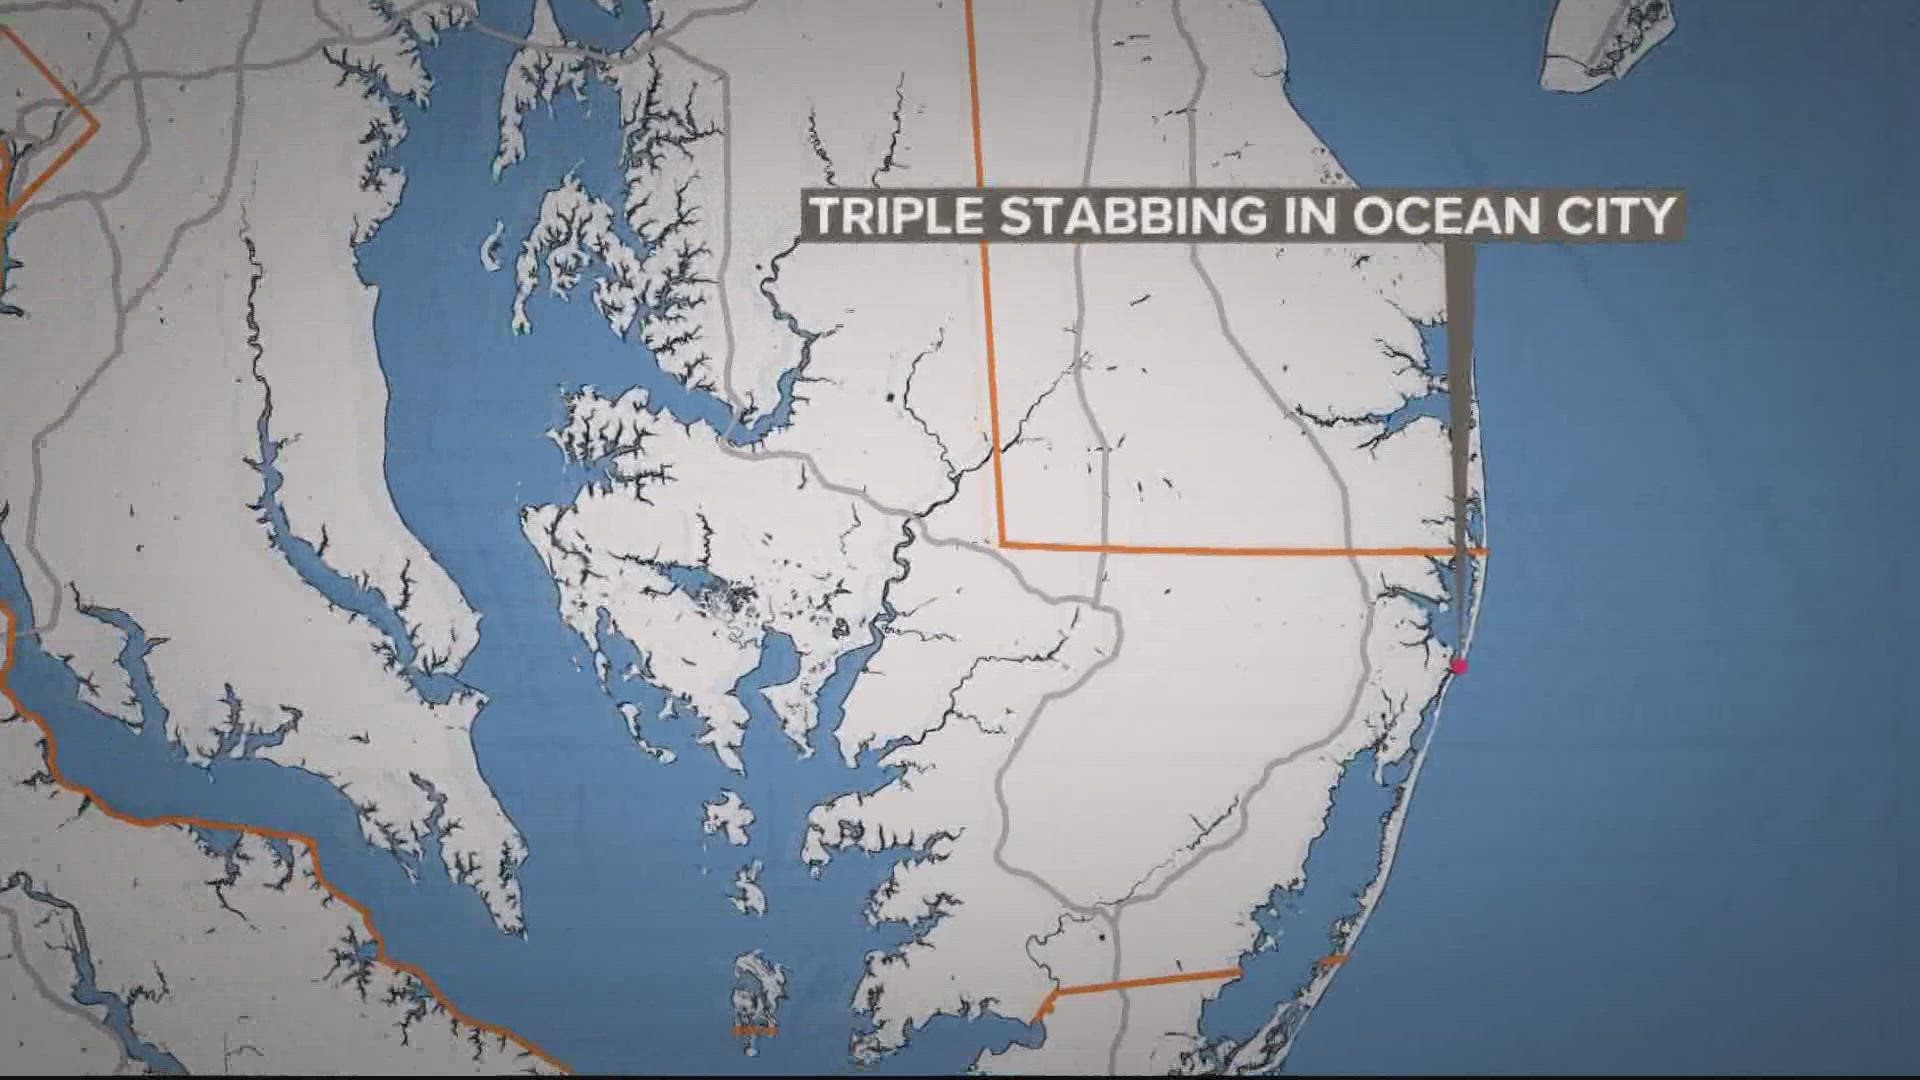 Officers responded to a call of a fight and found three people with stab wounds.